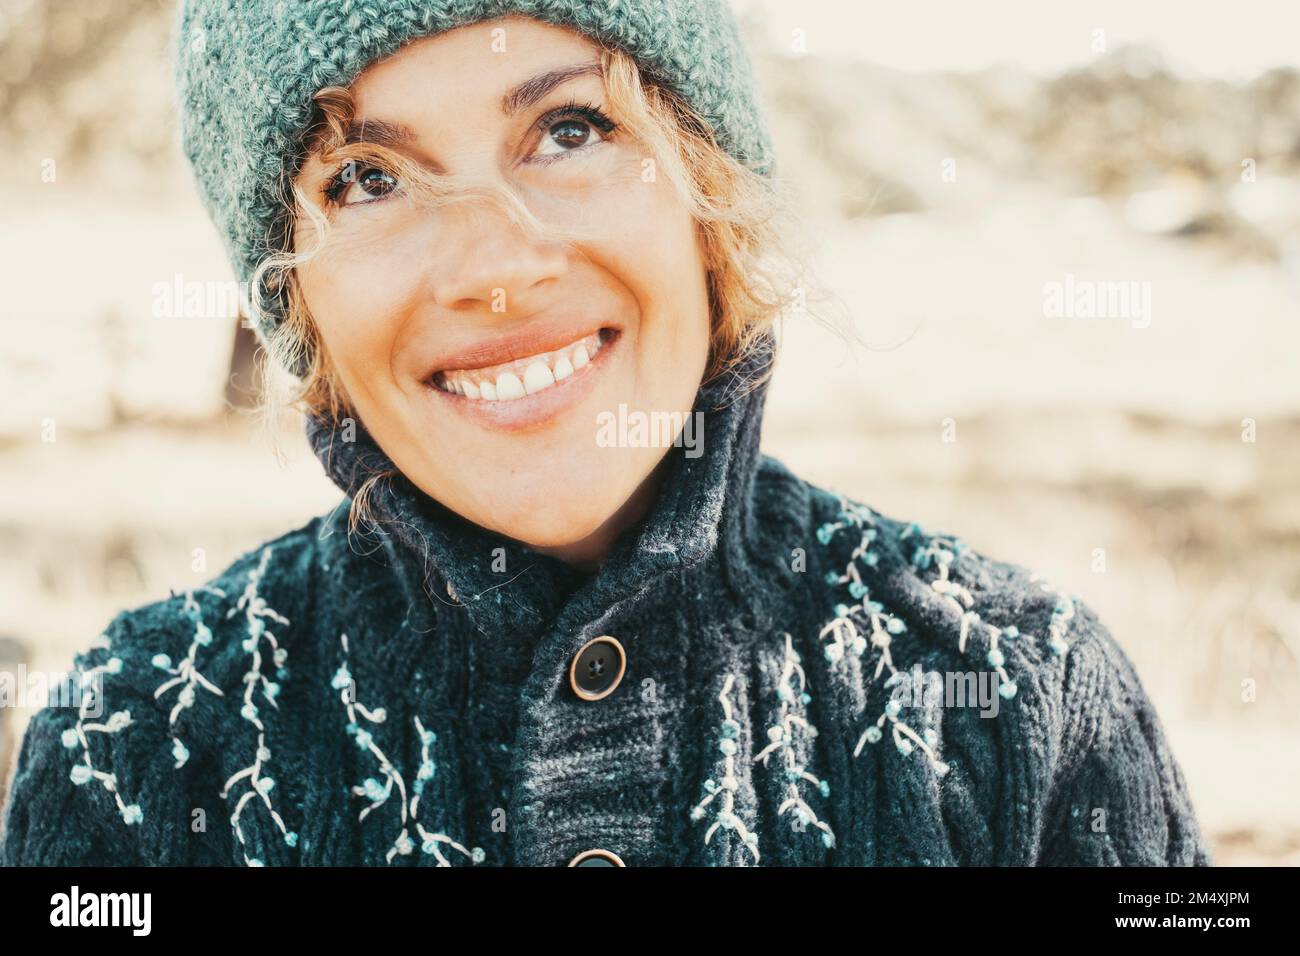 Thoughtful mature woman with toothy smile wearing warm clothing Stock Photo